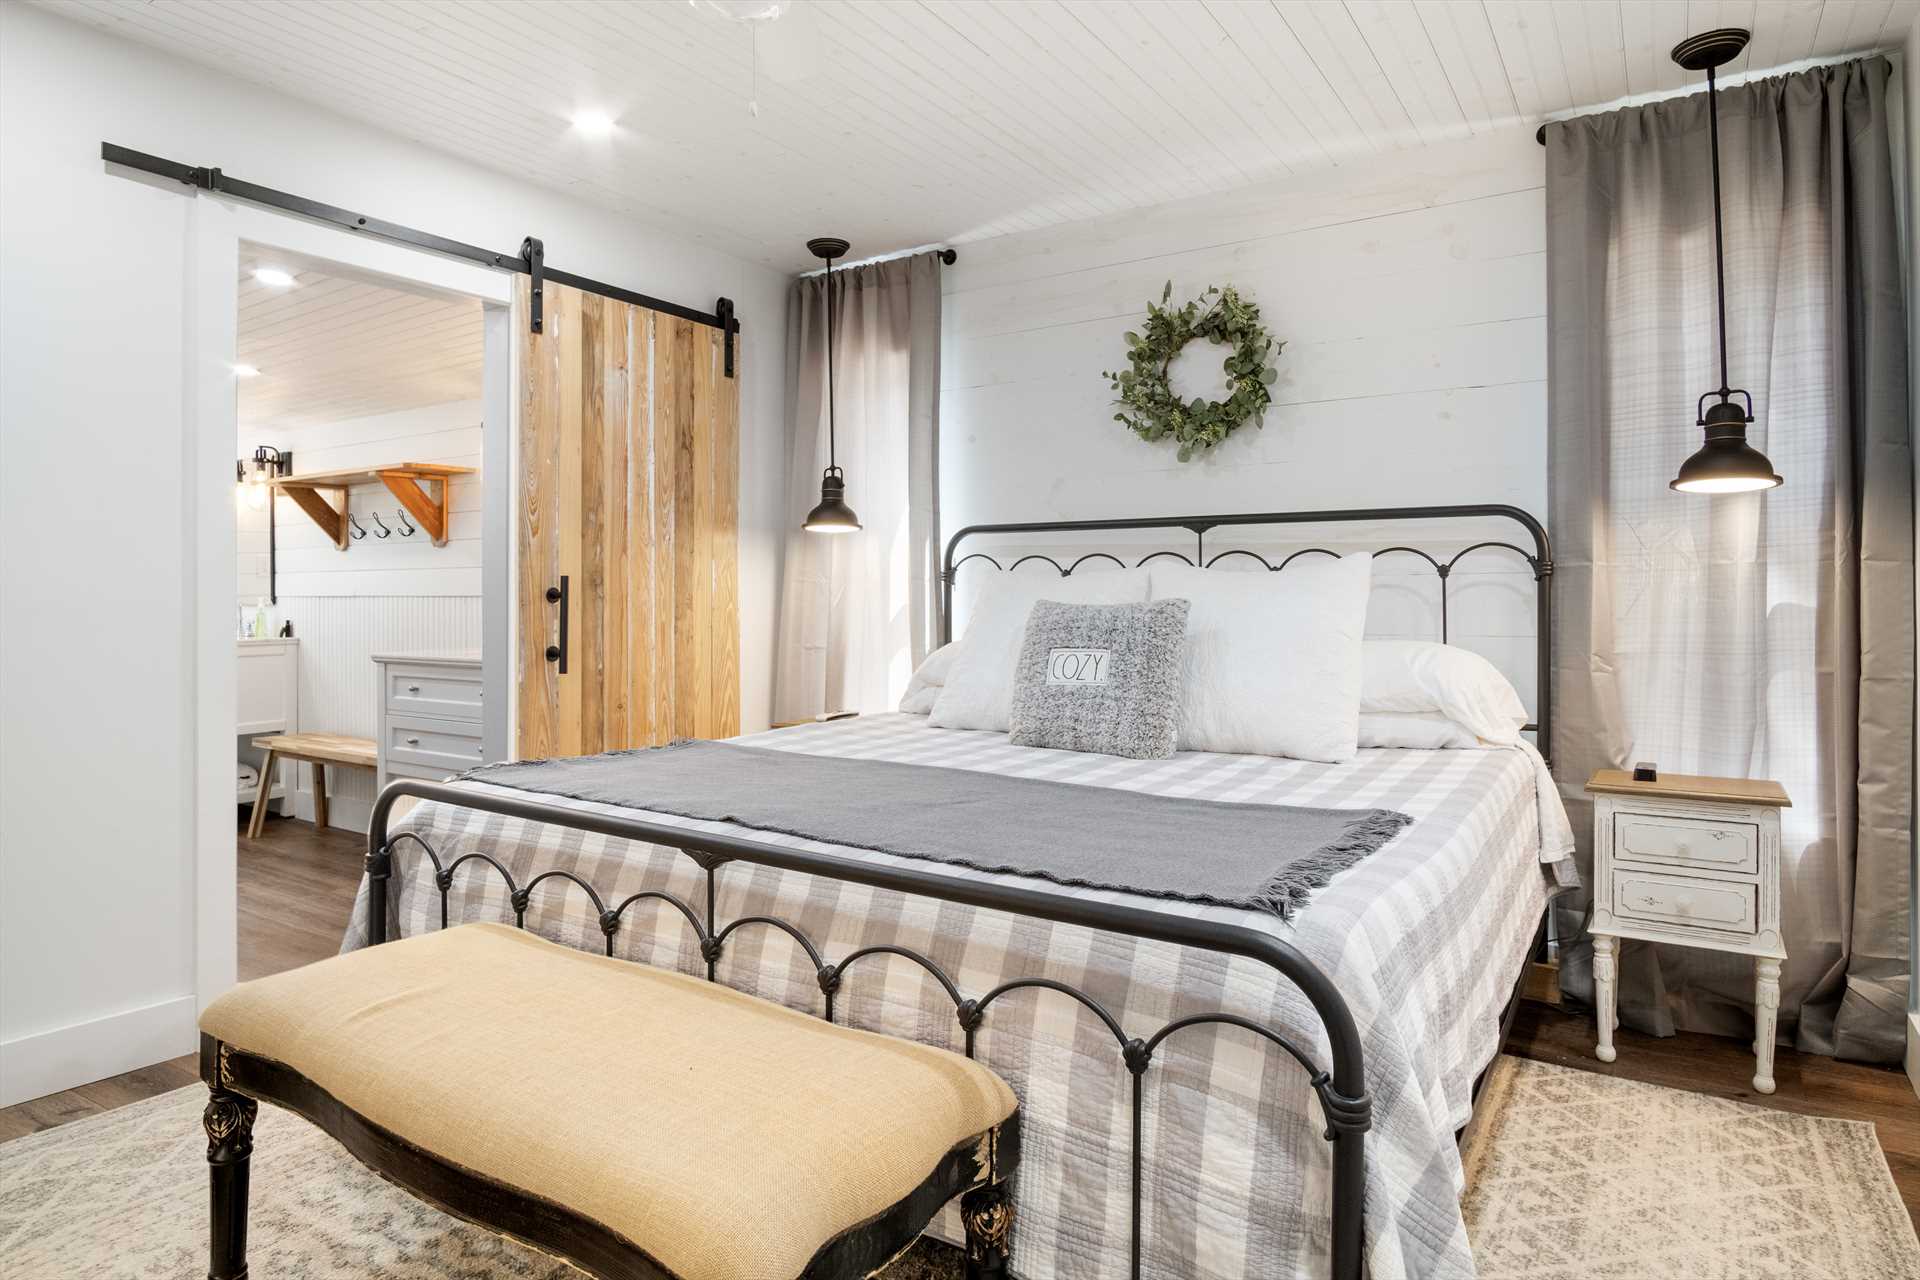                                                 A great big king-sized bed graces the master bedroom, with a full bath completing the en suite.